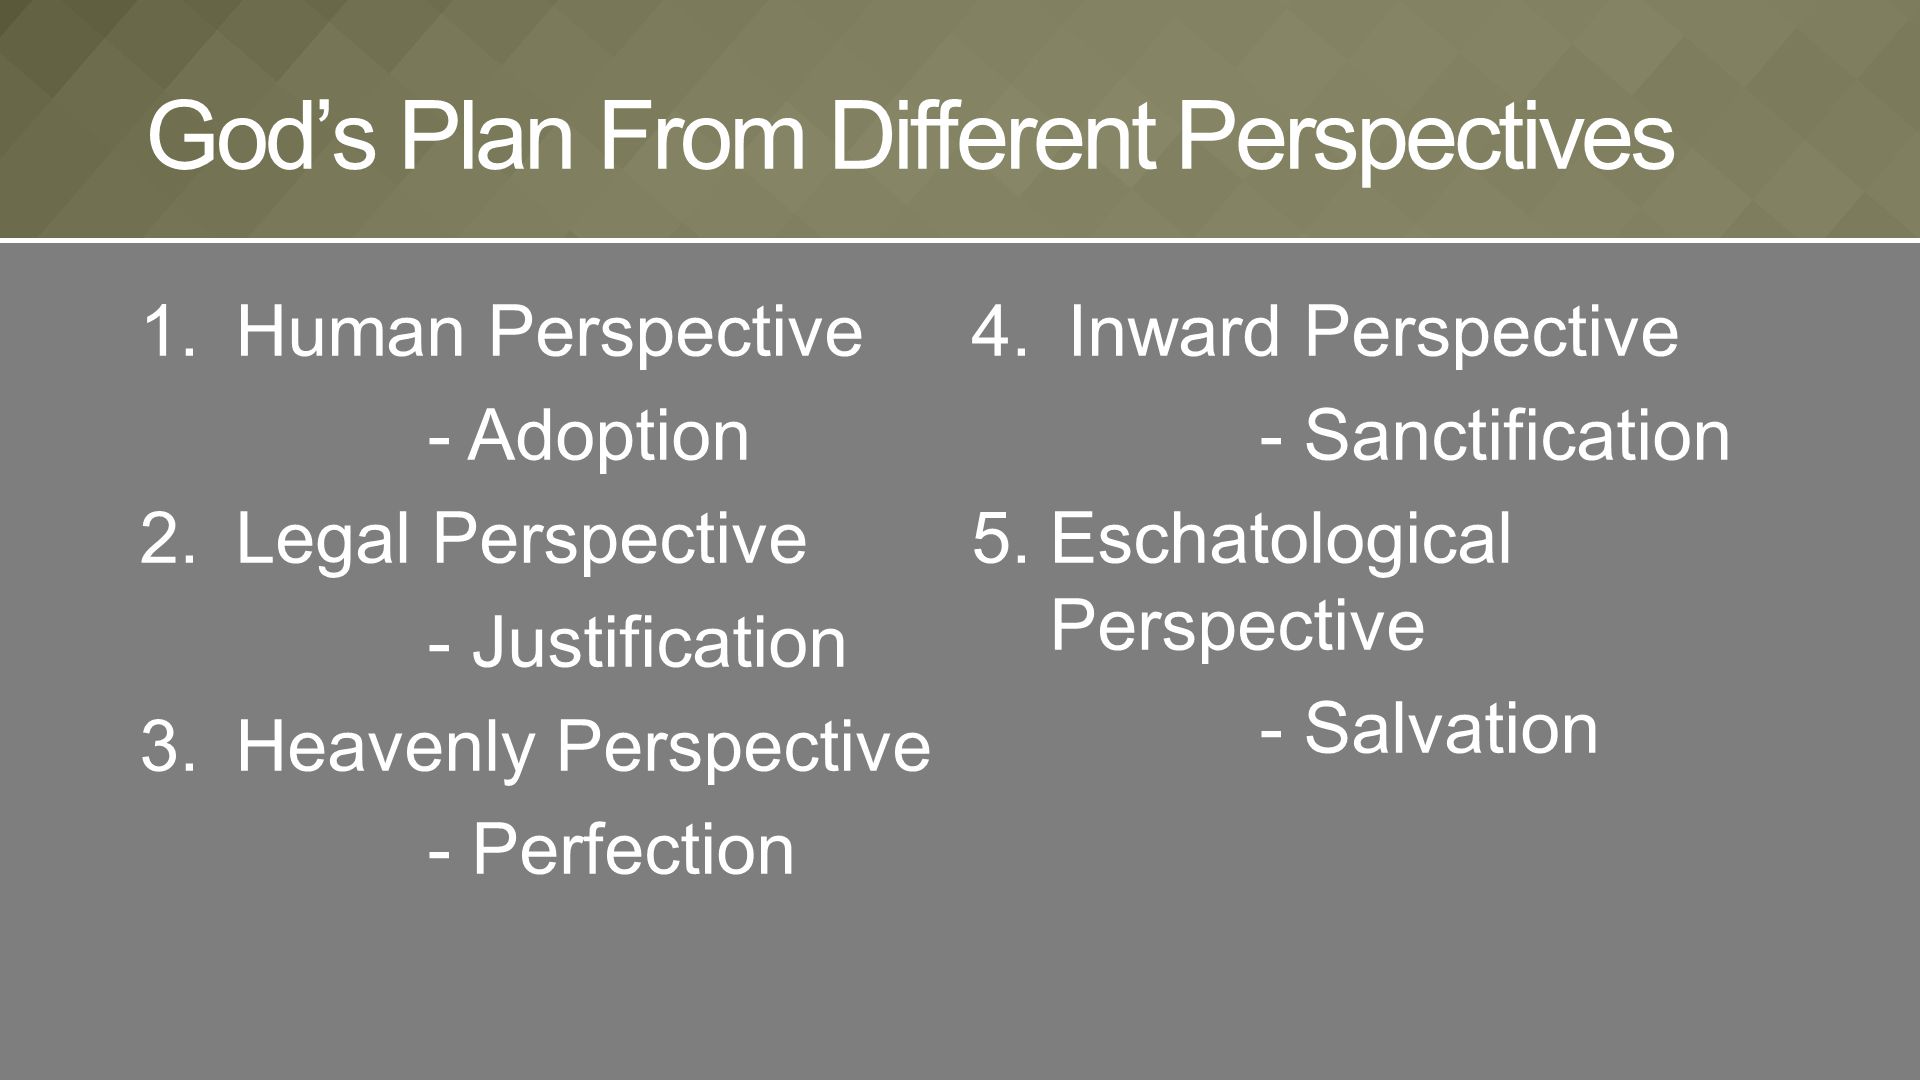 1.Human Perspective - Adoption 2.Legal Perspective - Justification 3.Heavenly Perspective - Perfection God’s Plan From Different Perspectives 4.Inward Perspective - Sanctification 5.Eschatological Perspective - Salvation